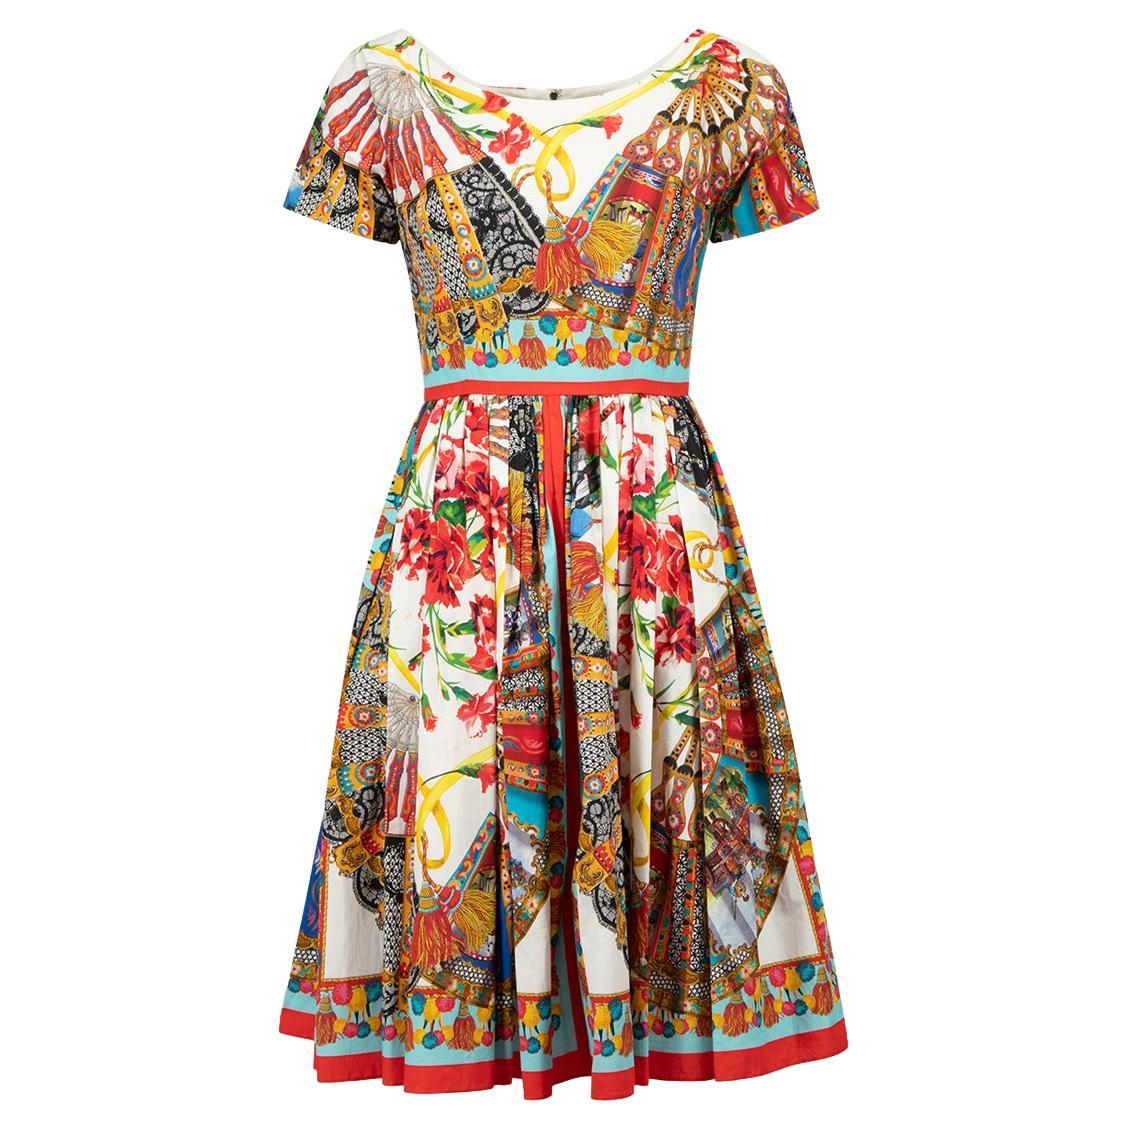 Printed Short Sleeve Knee Length Dress Size XS For Sale